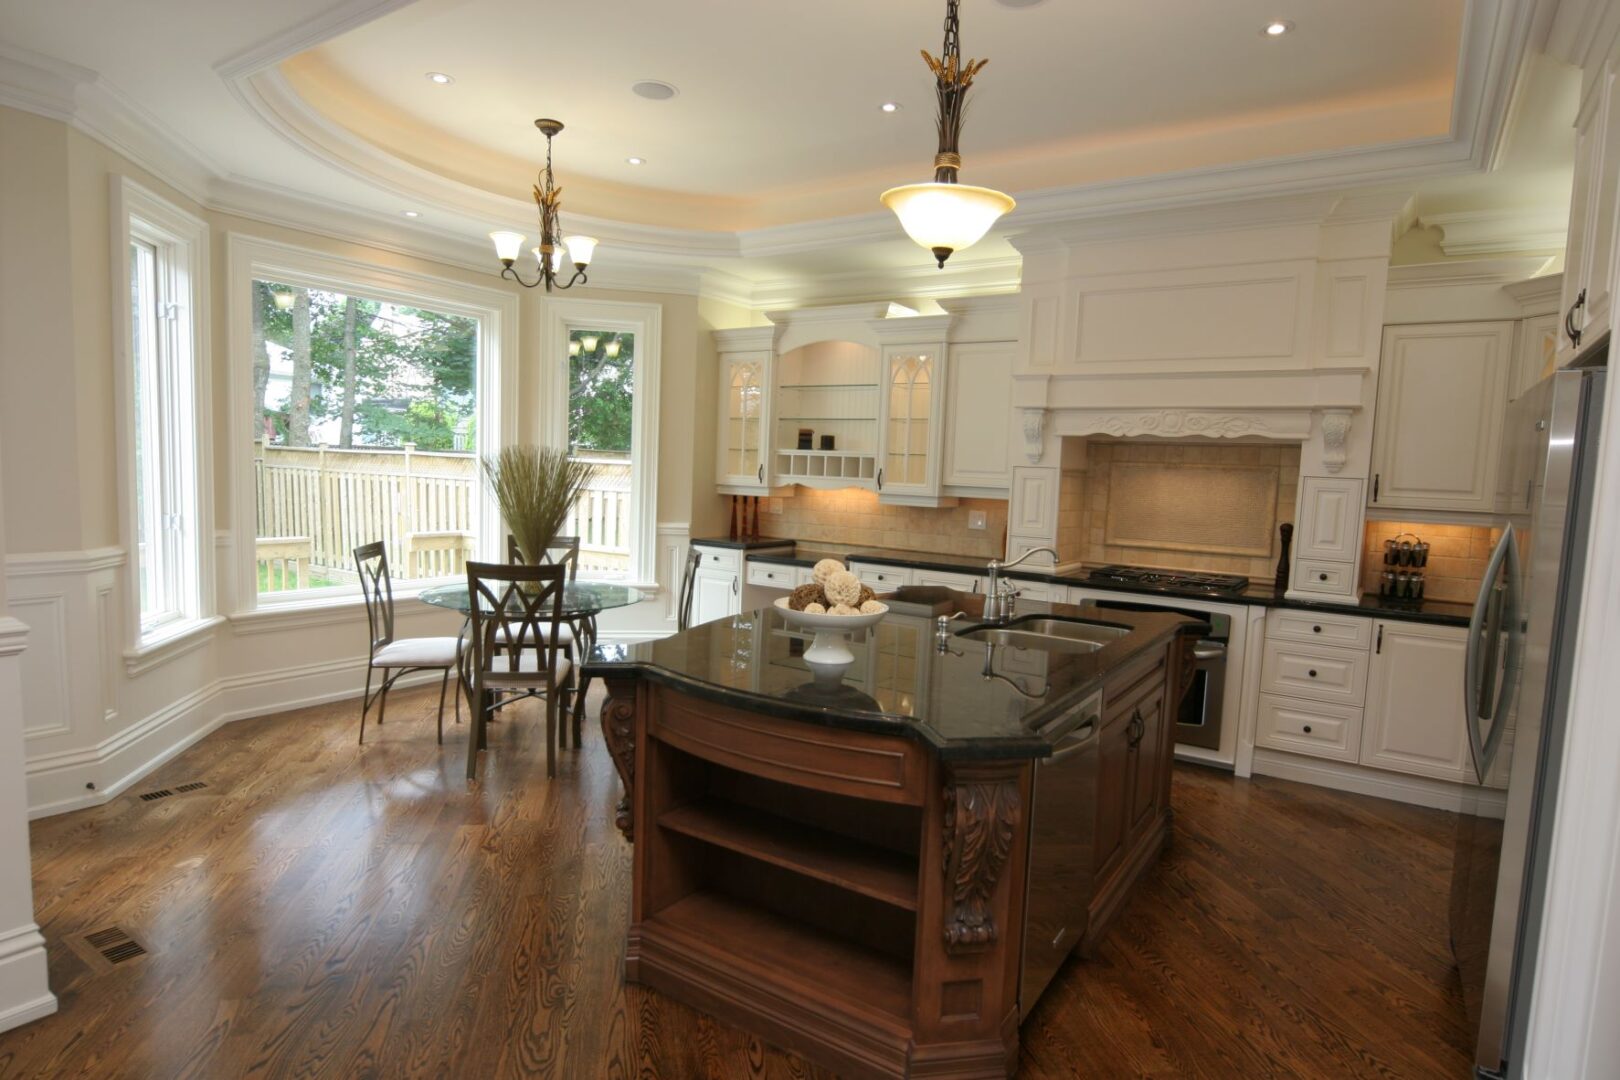 An Island With Granite Counter With a Design